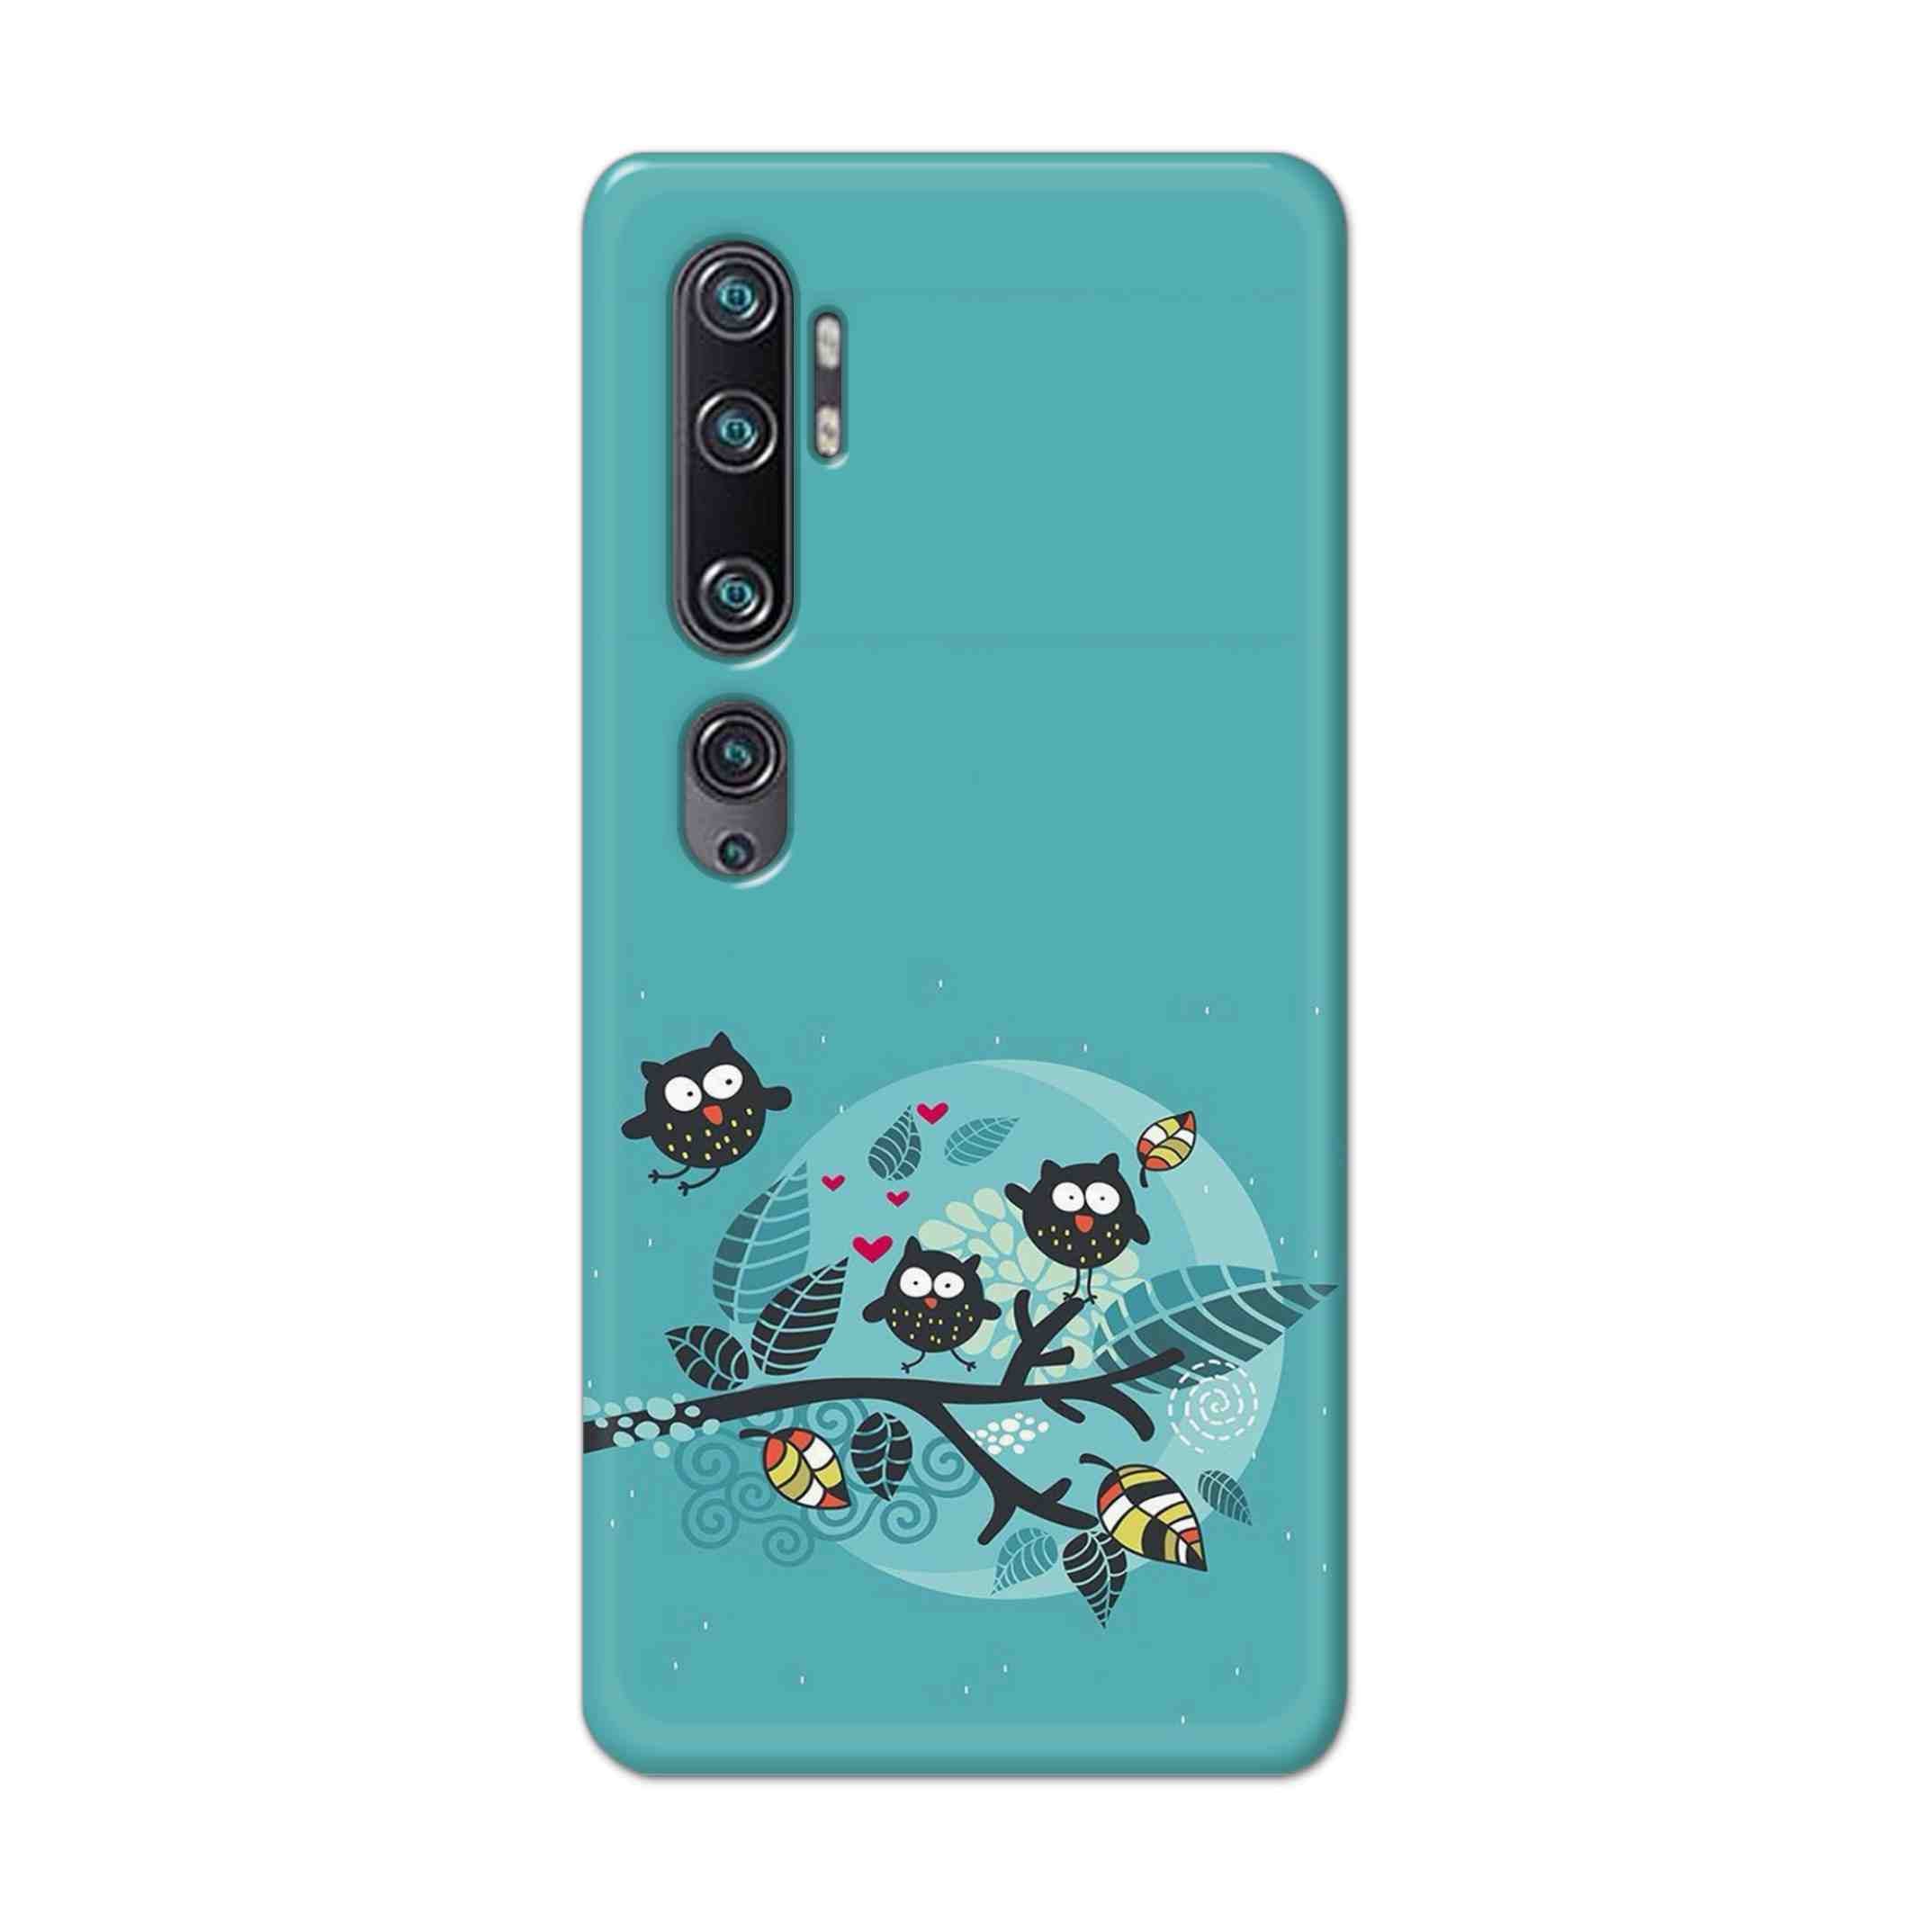 Buy Owl Hard Back Mobile Phone Case Cover For Xiaomi Mi Note 10 Online